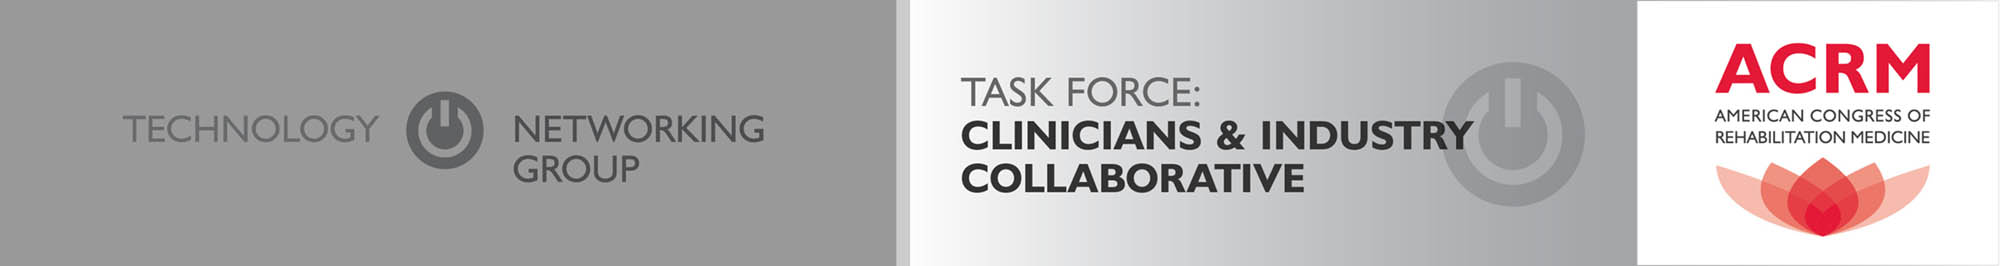 ACRM Technology Networking Group: Clinicians & Industry Collaborative Task Force